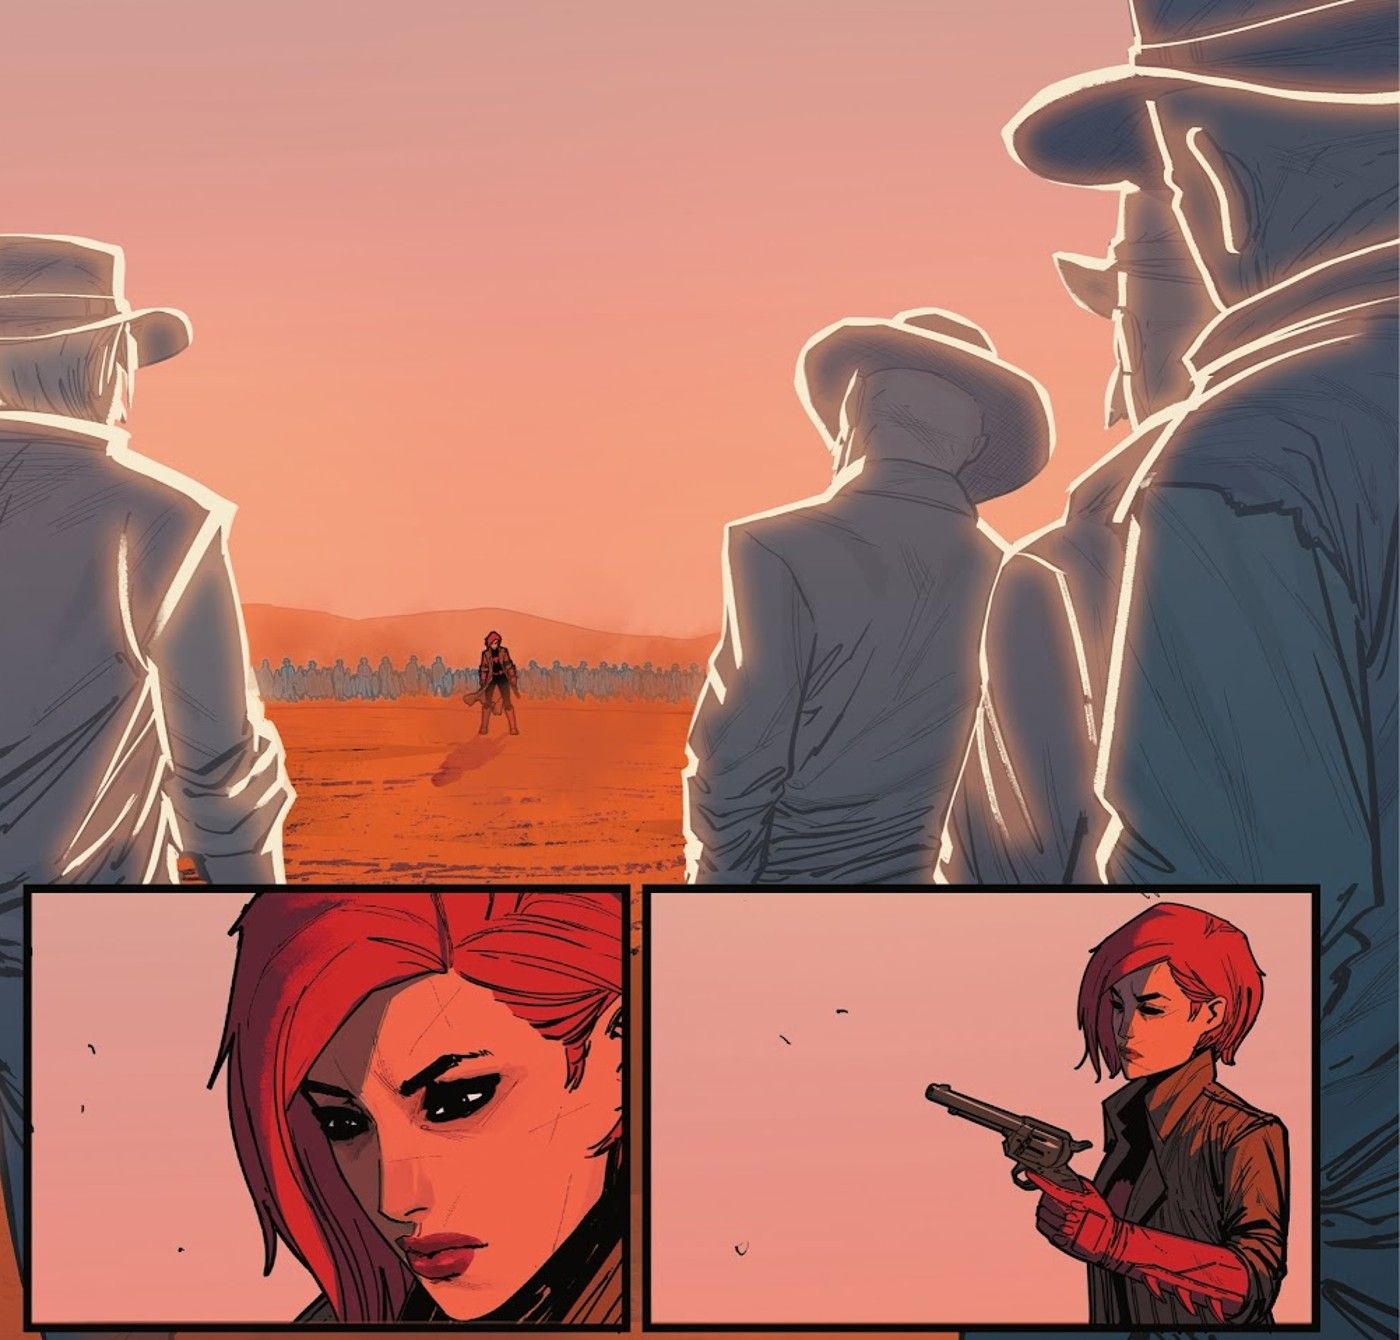 Batwoman stares down ghost cowboys in the old west in Outsiders #8